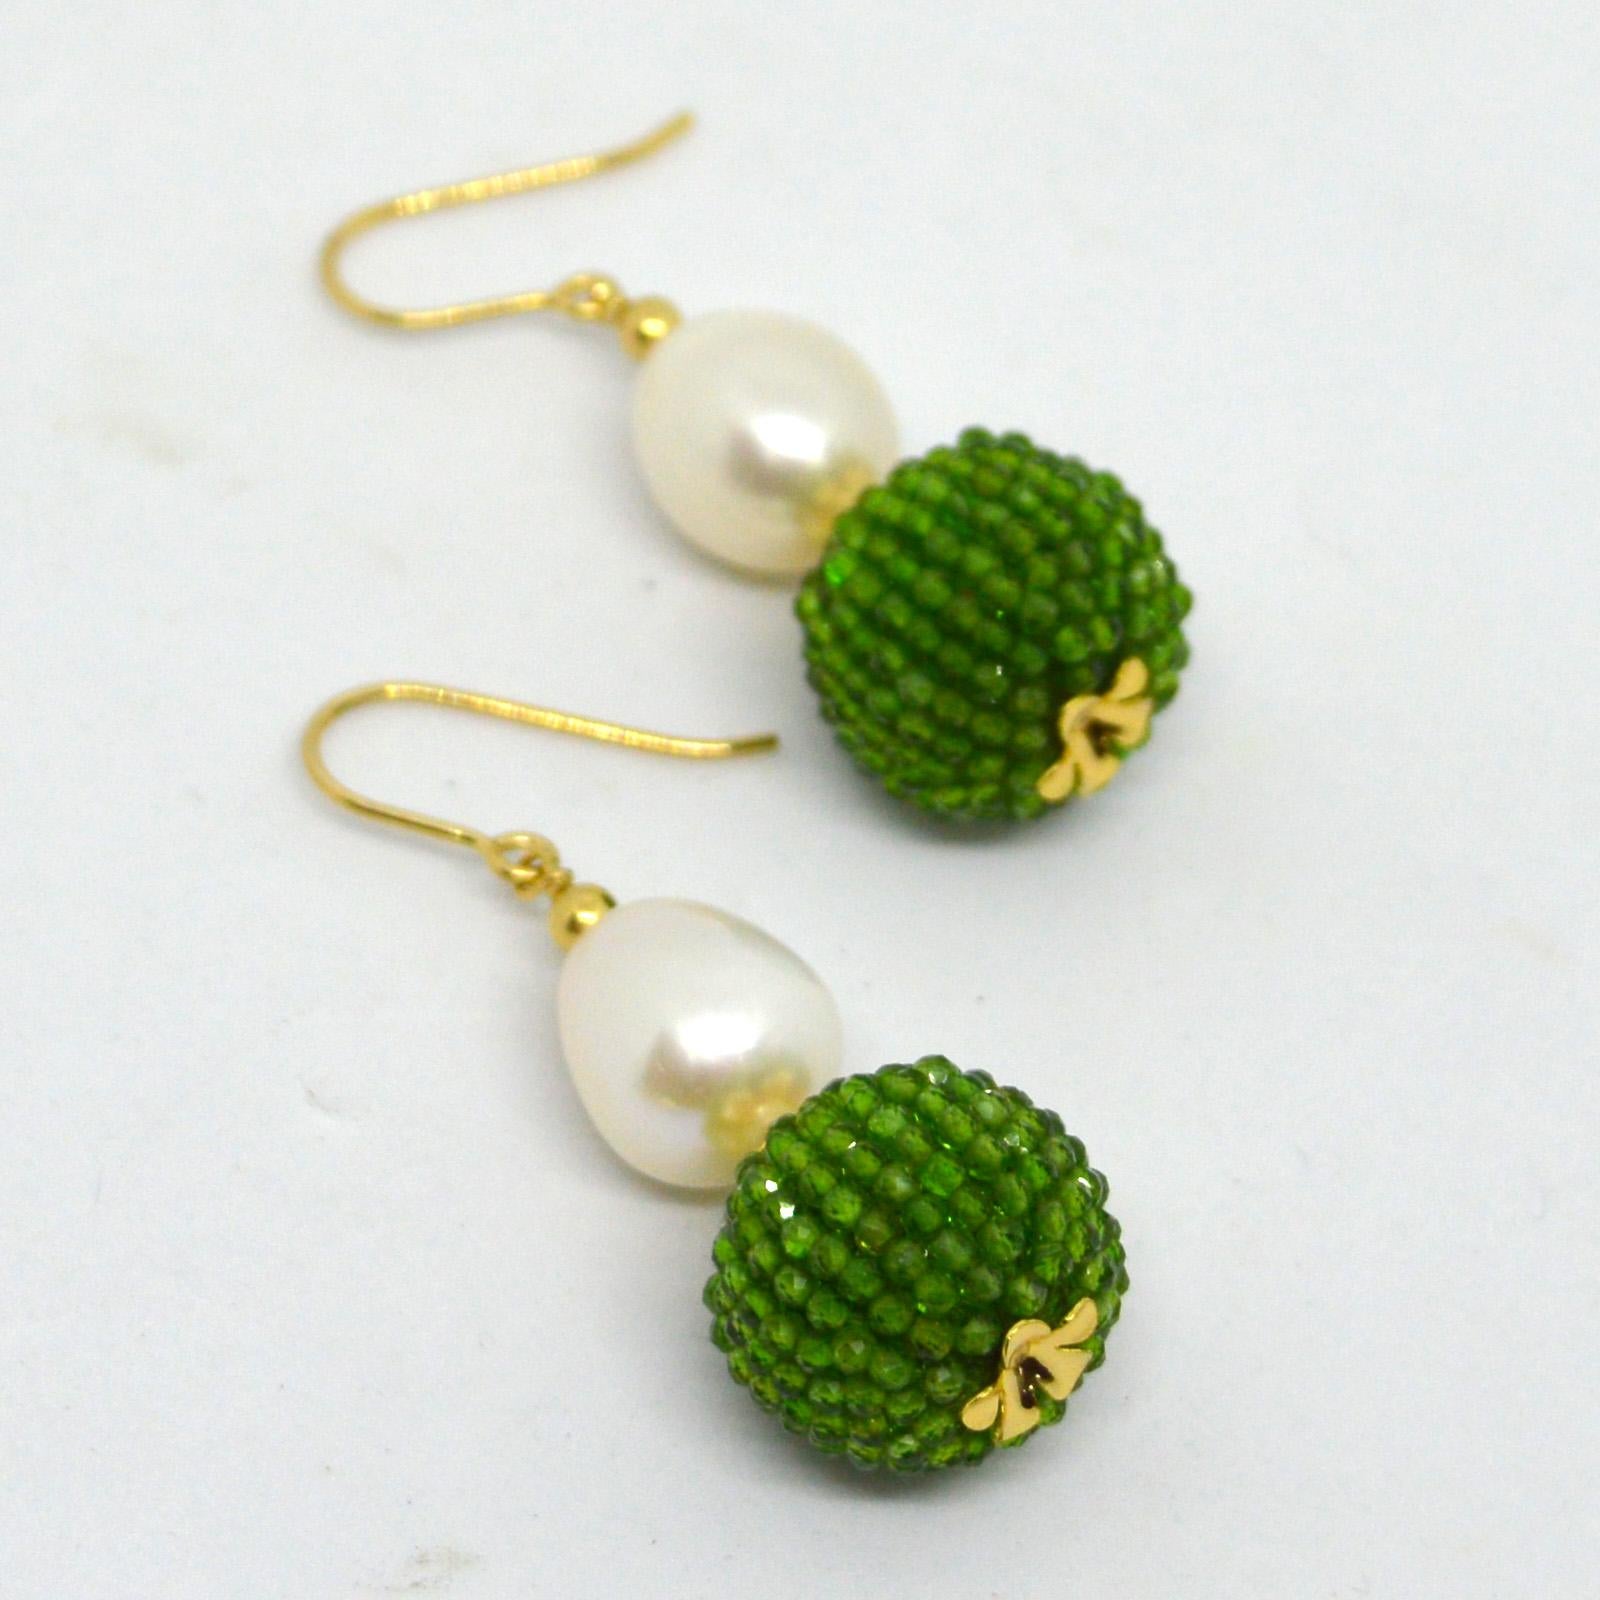 Natural Freshwater Pearl 15x10mm with a hand made beaded bead of natural Chrome Diopside mirco faceted beads 14k Gold Filled headpin and 3mm beads and Sheppard.

Total Earring length 45mm.
